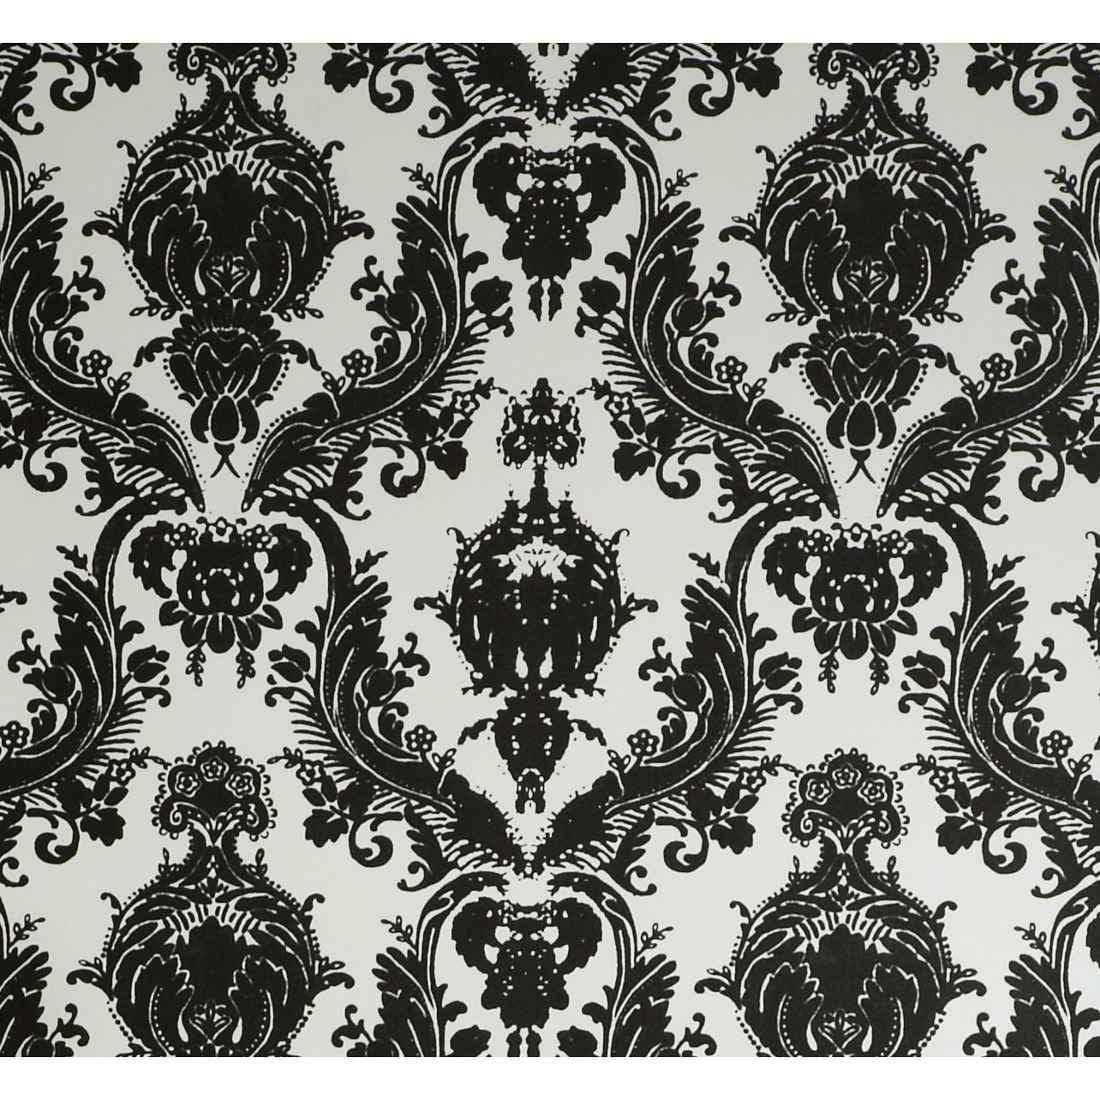 Black and White Wall Patterns